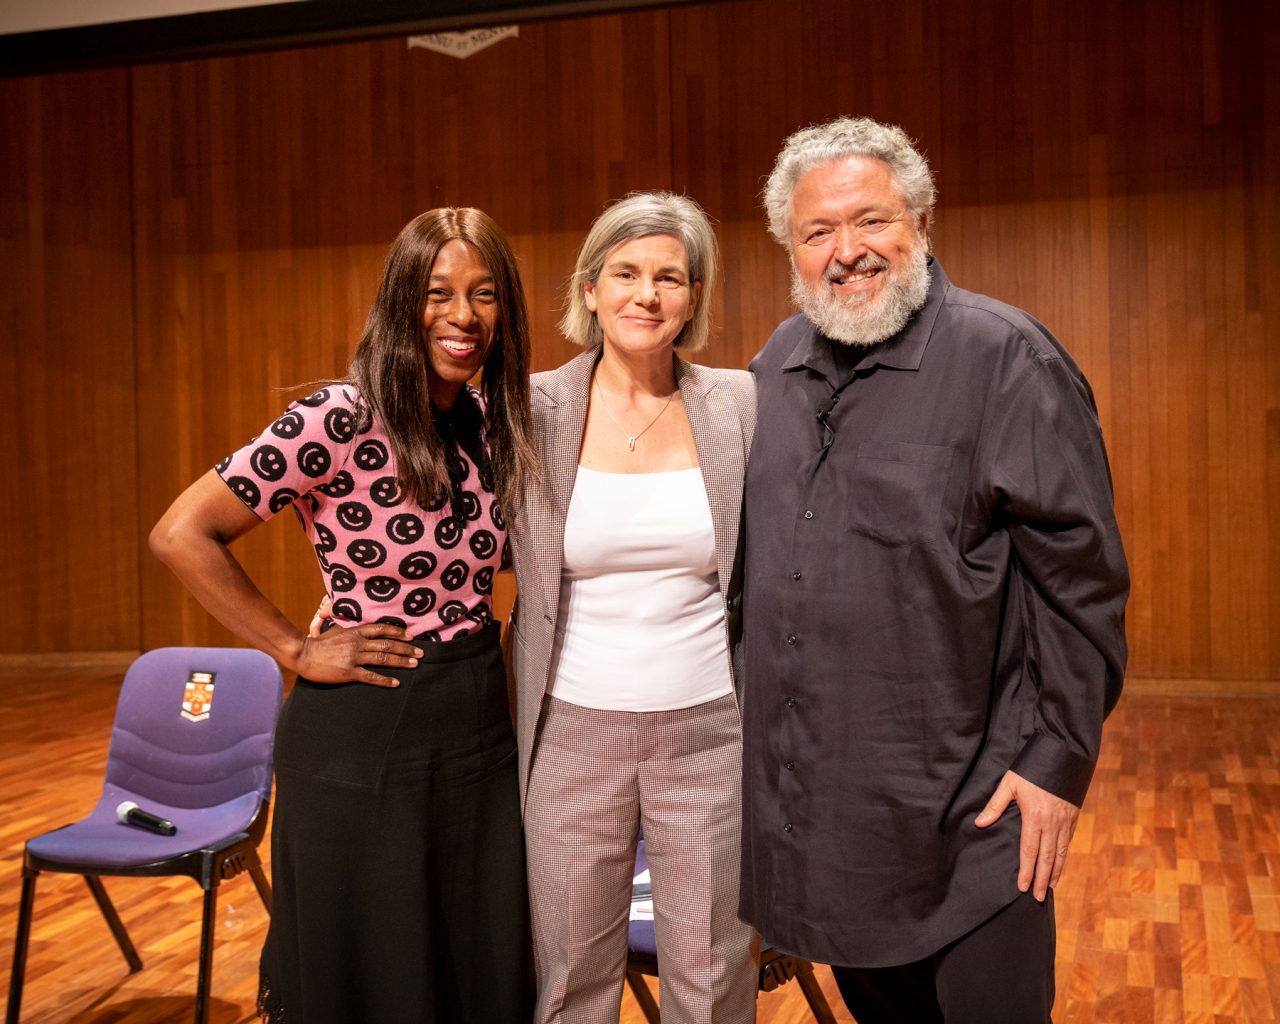 Bisi Williams, Claire Annesley and Bruce Mau group photo at UNSW Sydney for the Massive Action Network Collaboration